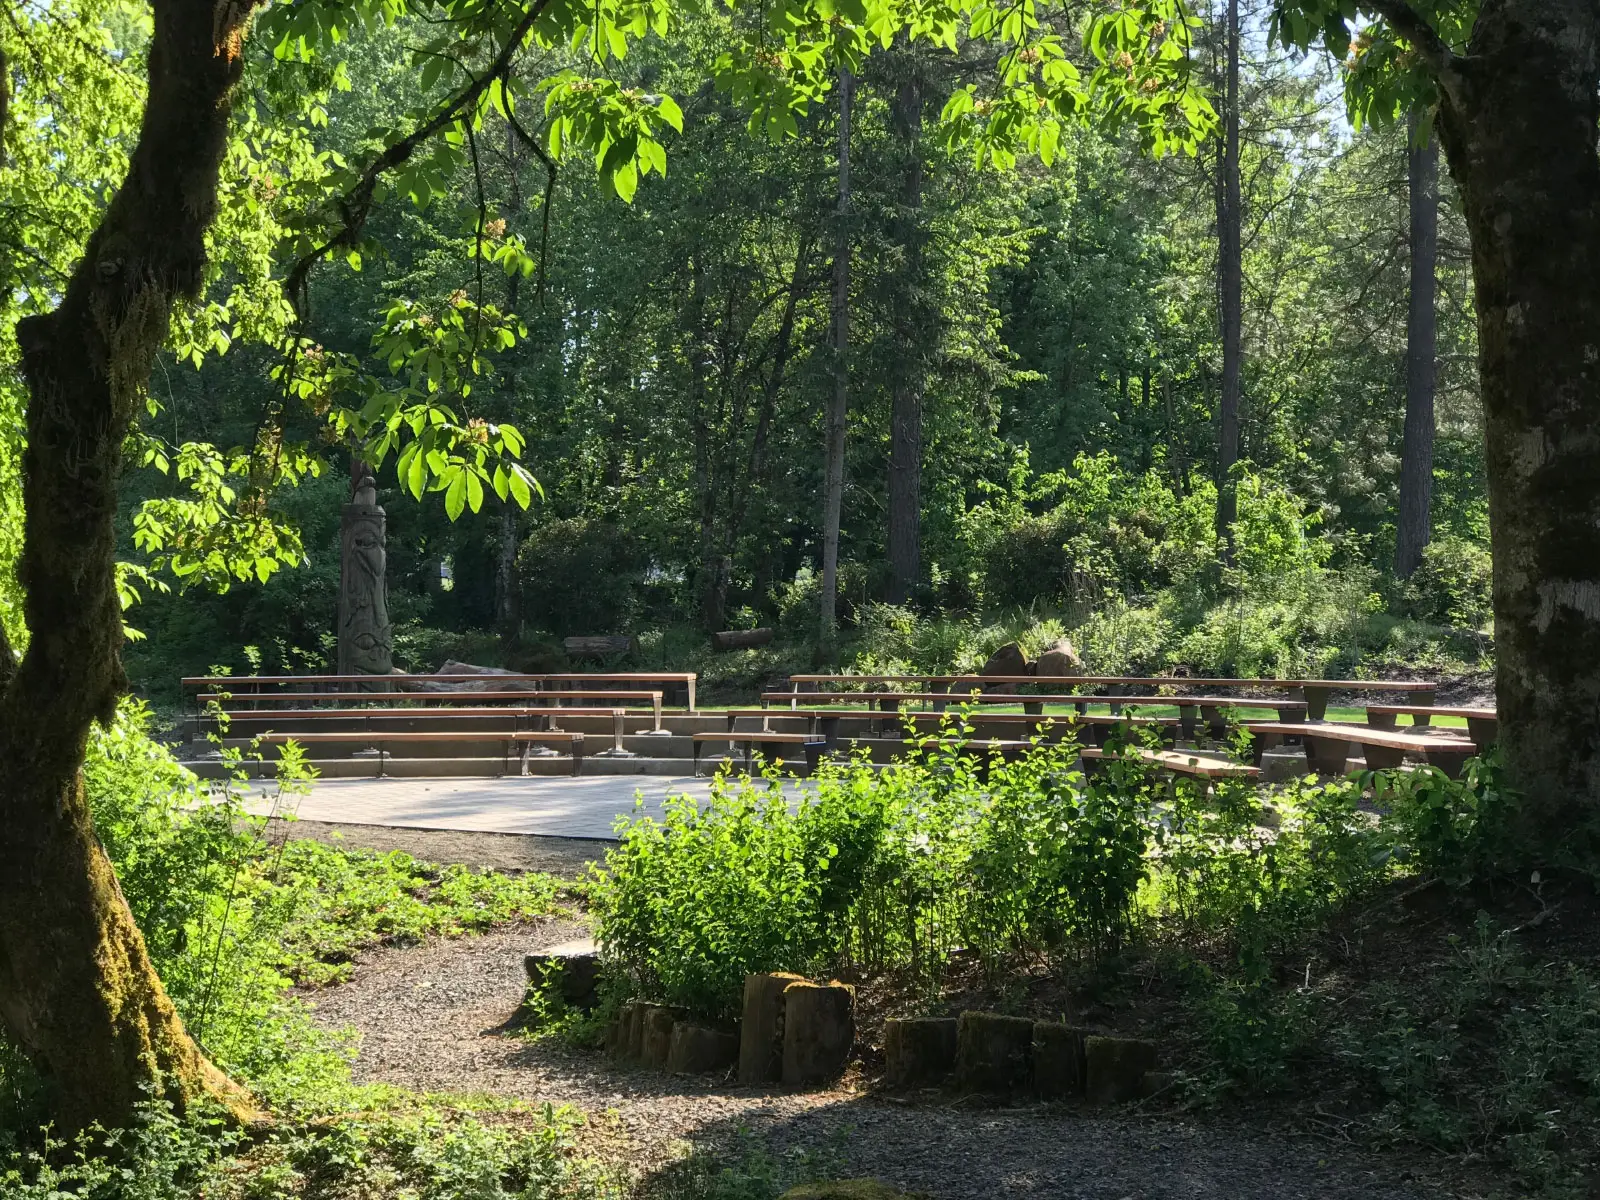 Trees, grass and a gravel path in front of the ELC amphitheater with rows of seats, at the Oregon City campus